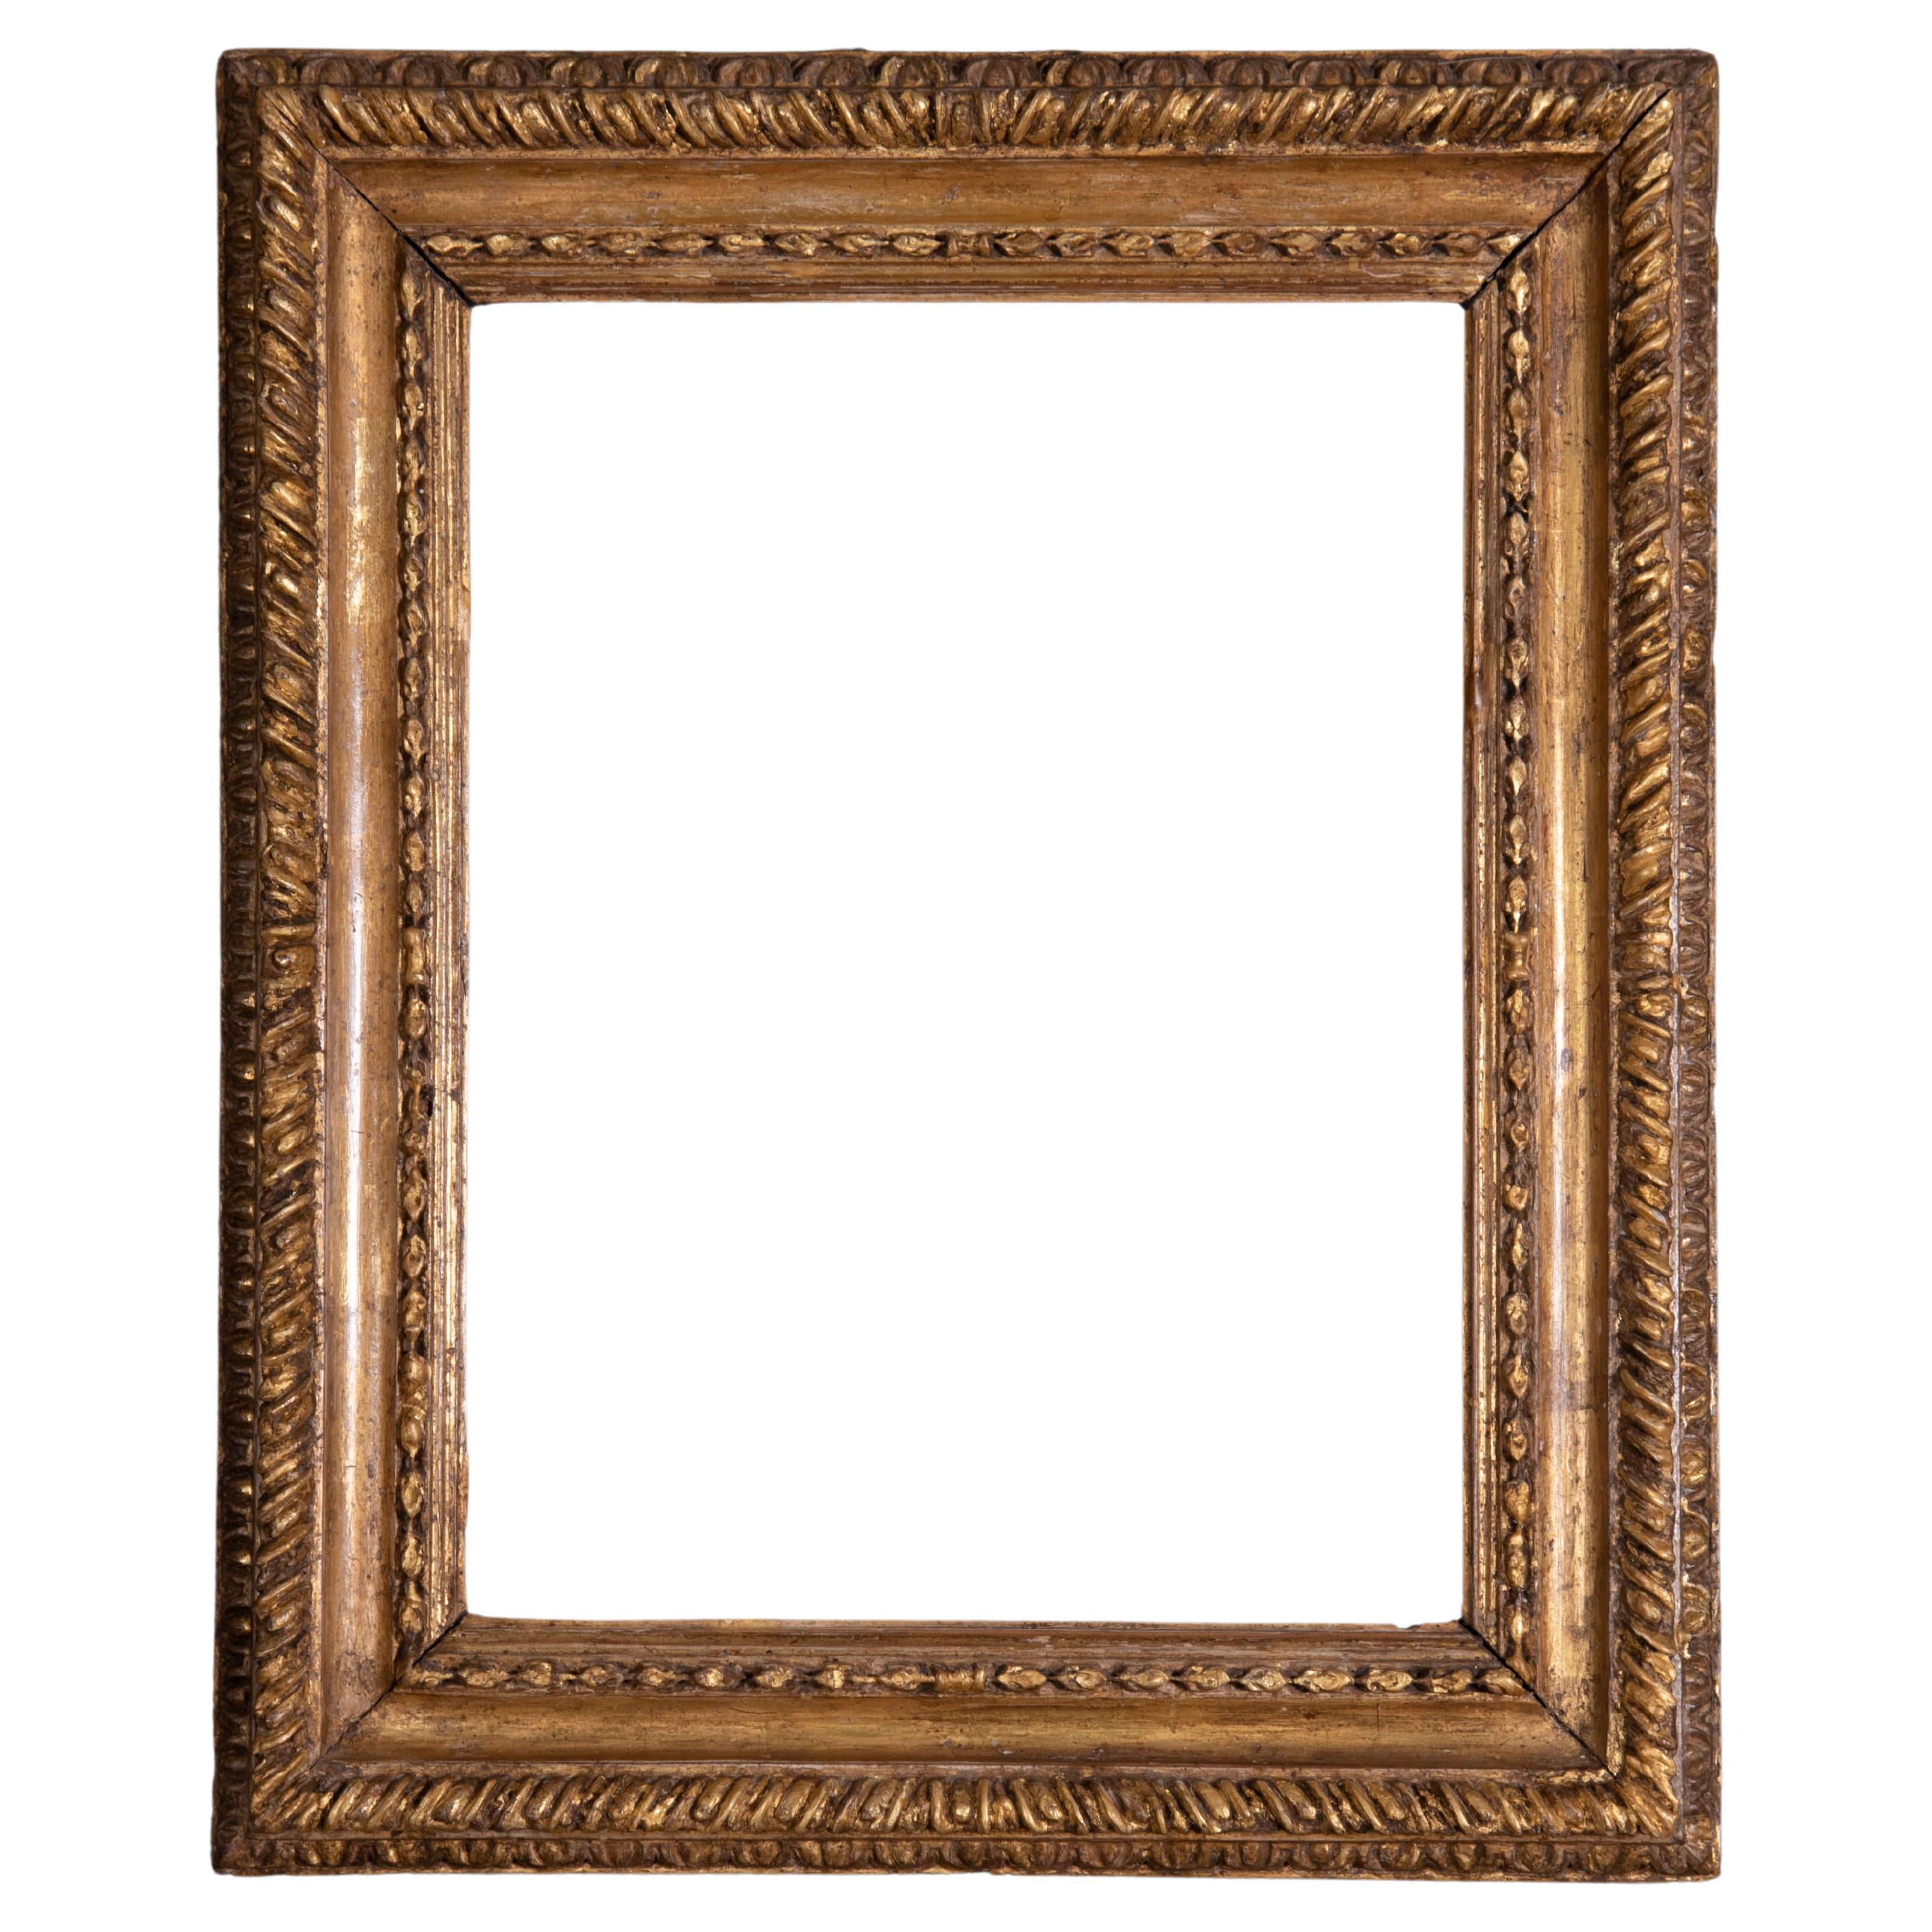 Early 18th Century Italian Salvator Rosa Gilded Frame For Sale